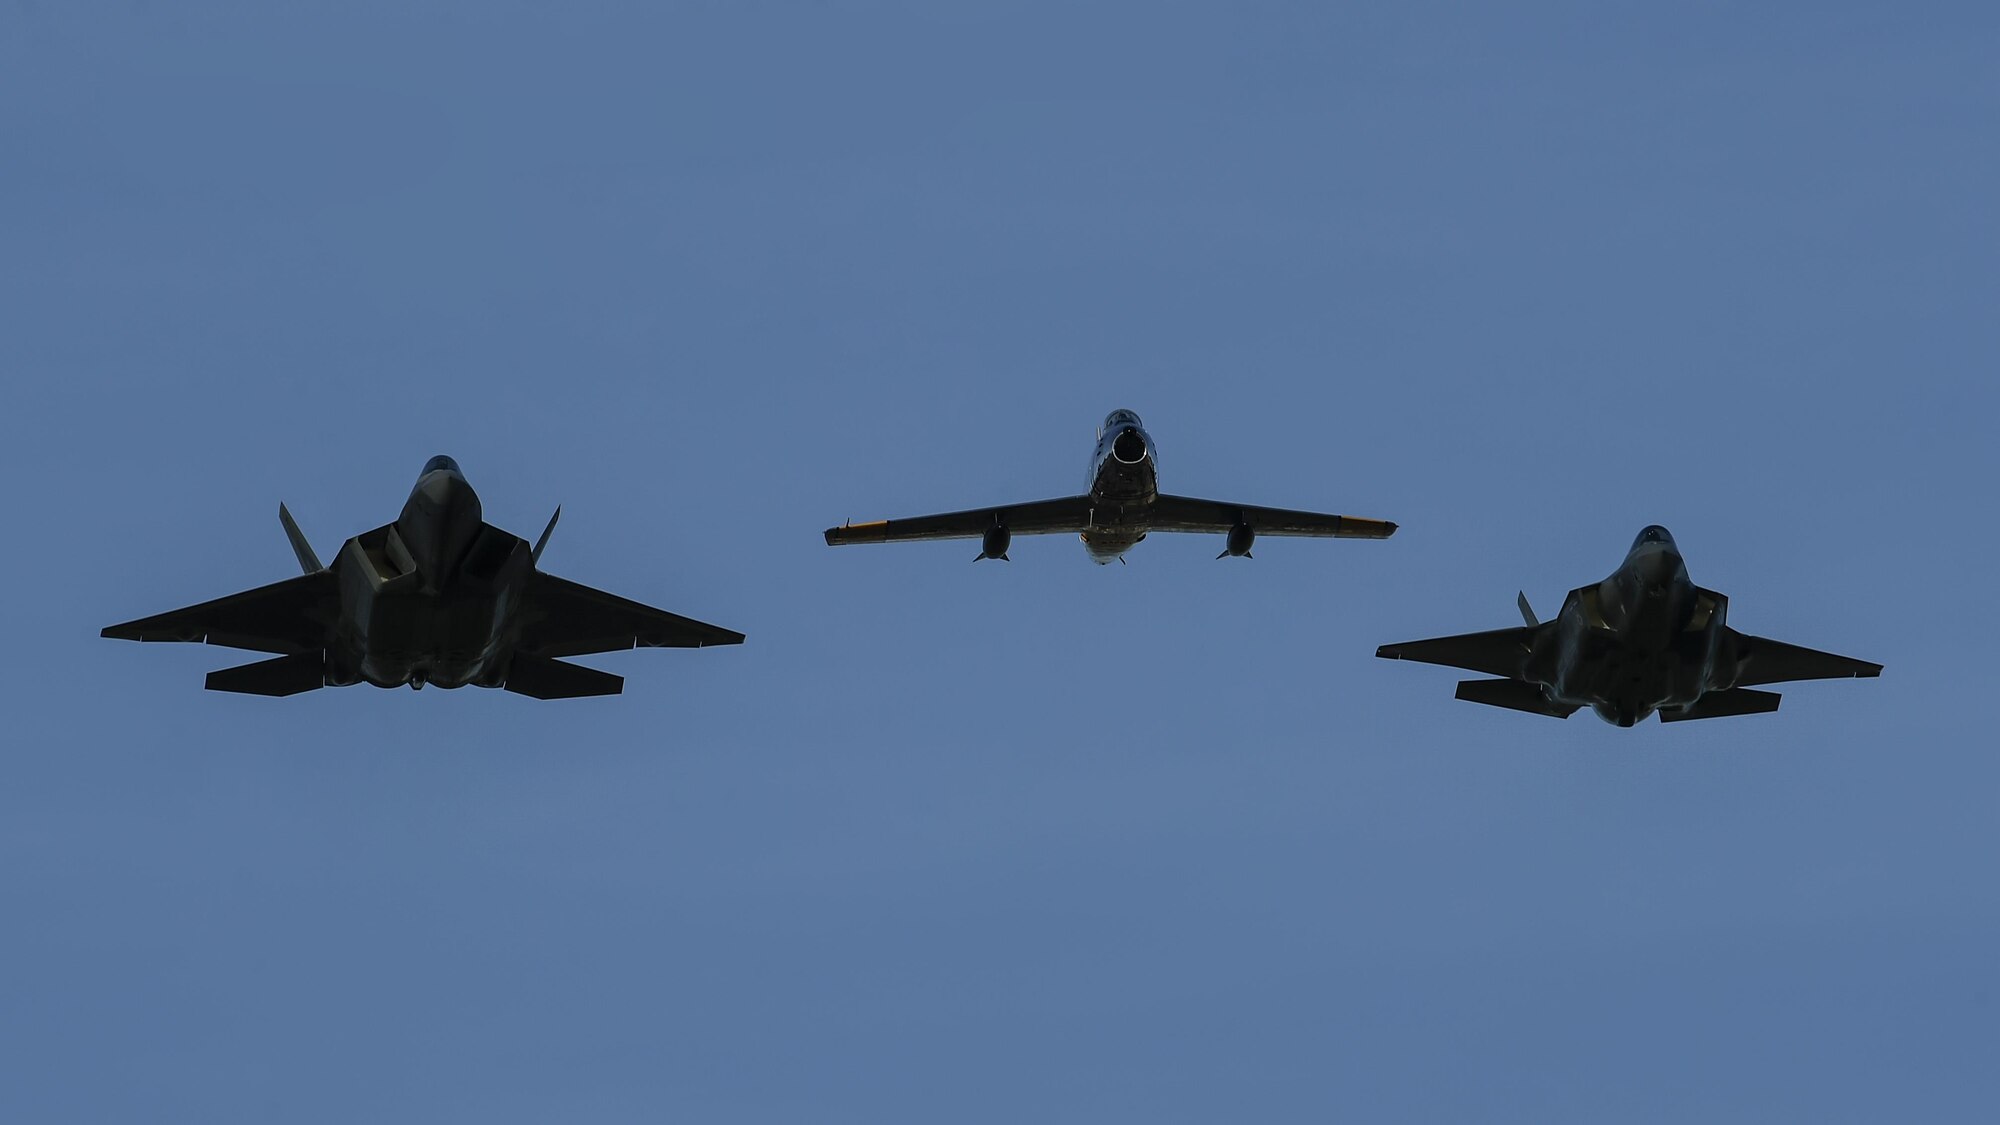 A U.S. Air Force F-22 Raptor, F-35 Lightning II and F-86 Sabre fly in formation during the 2017 Heritage Flight Training and Certification Course at Davis-Monthan Air Force Base, Ariz., Feb. 10, 2017. The 20th annual training event has been held at D-M since 2001 and features aerial demonstrations from historical and modern fighter aircraft. (U.S. Air Force photo by Senior Airman Chris Drzazgowski)